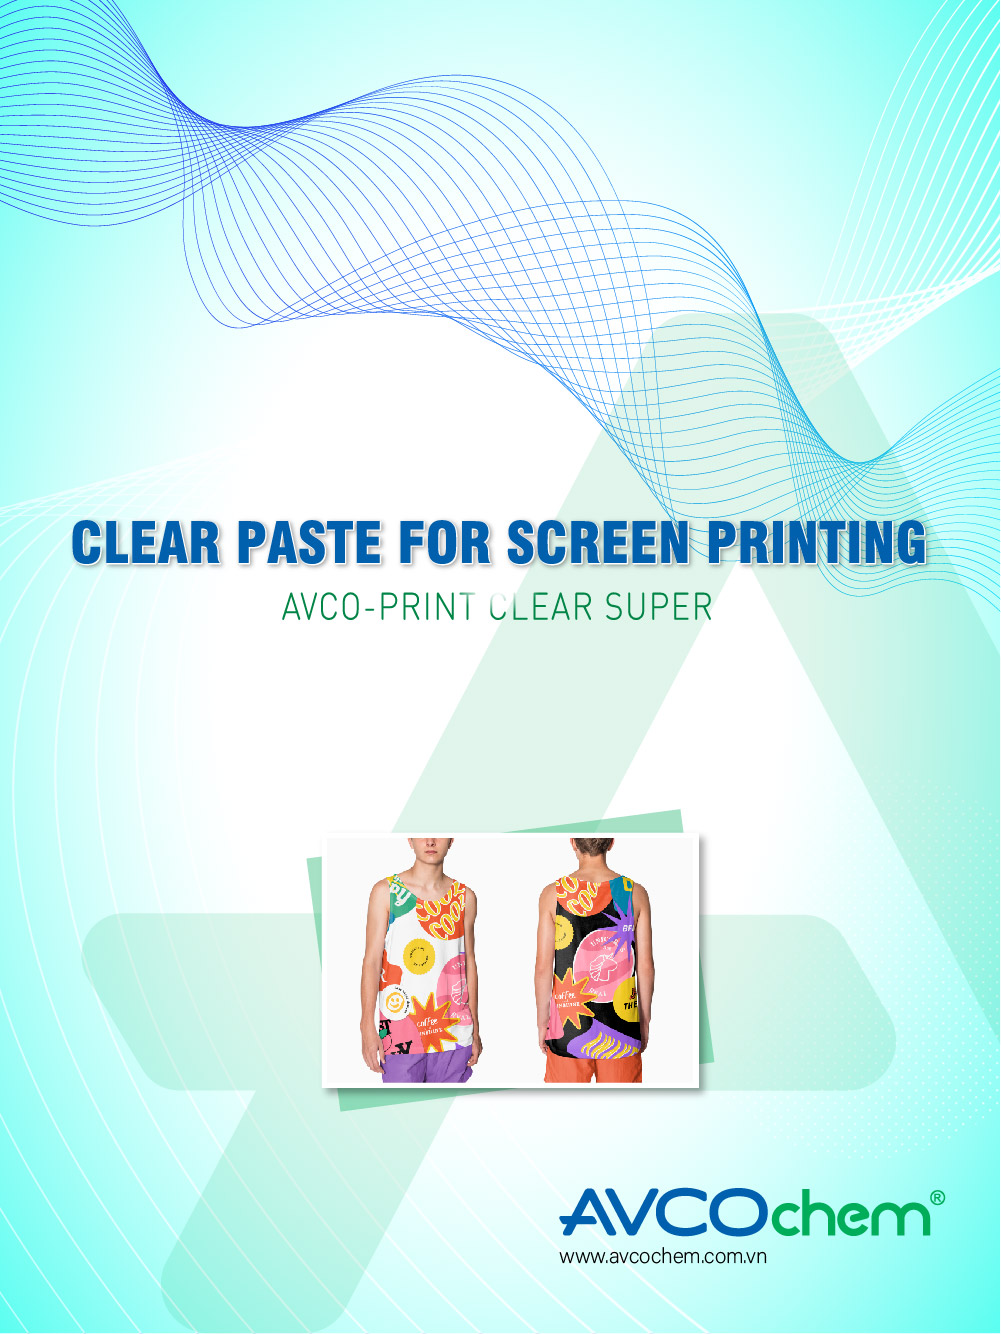 CLEAR PASTE FOR SCREEN PRINTING